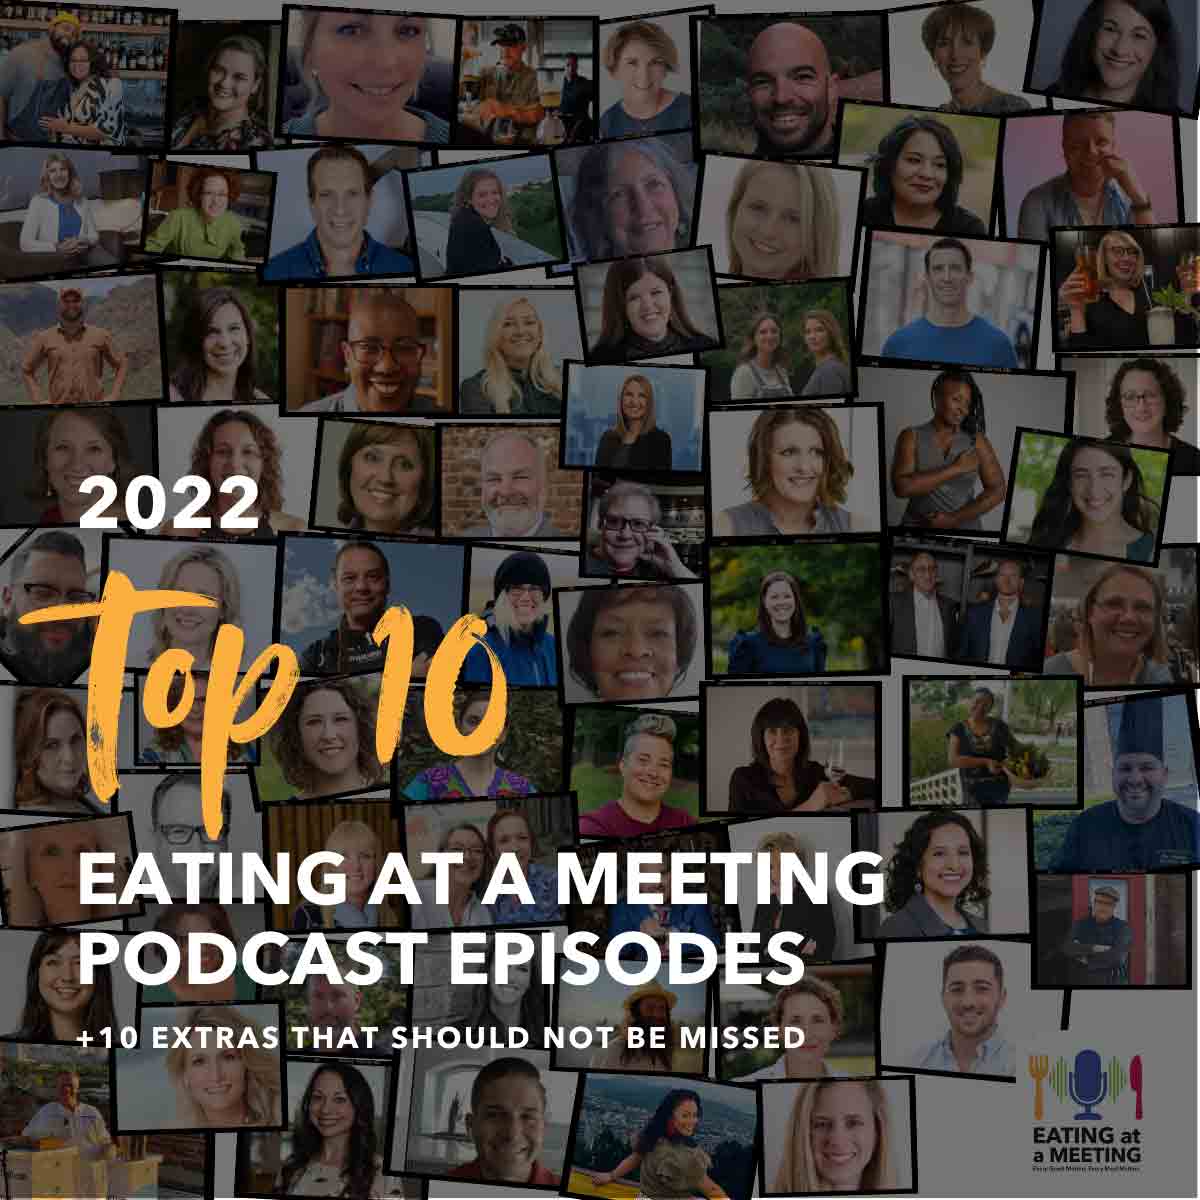 a group of 80 images of people scattered across the page. In the bottom right is the Eating at a Meeting logo. The images are of the 2022 guests of the show.